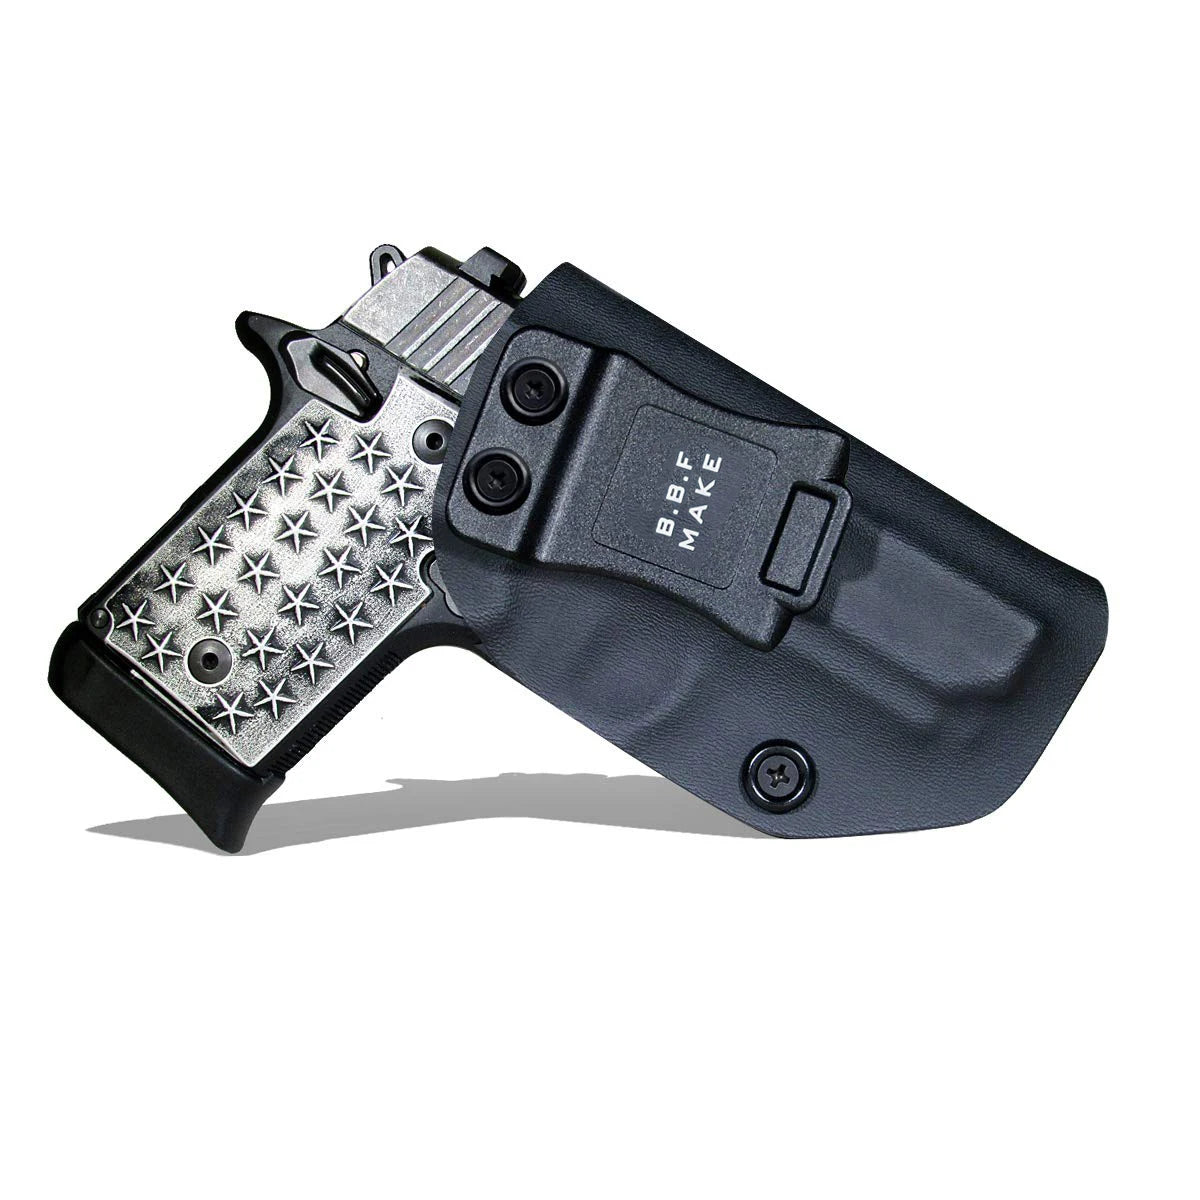 Sig Sauer P938 SAS (IWB) Inside Waistband Kydex Covert Carry Holster | Posi Click Ready | IWB Concealed Kydex Holster | Carbon Fiber or Kydex | Black